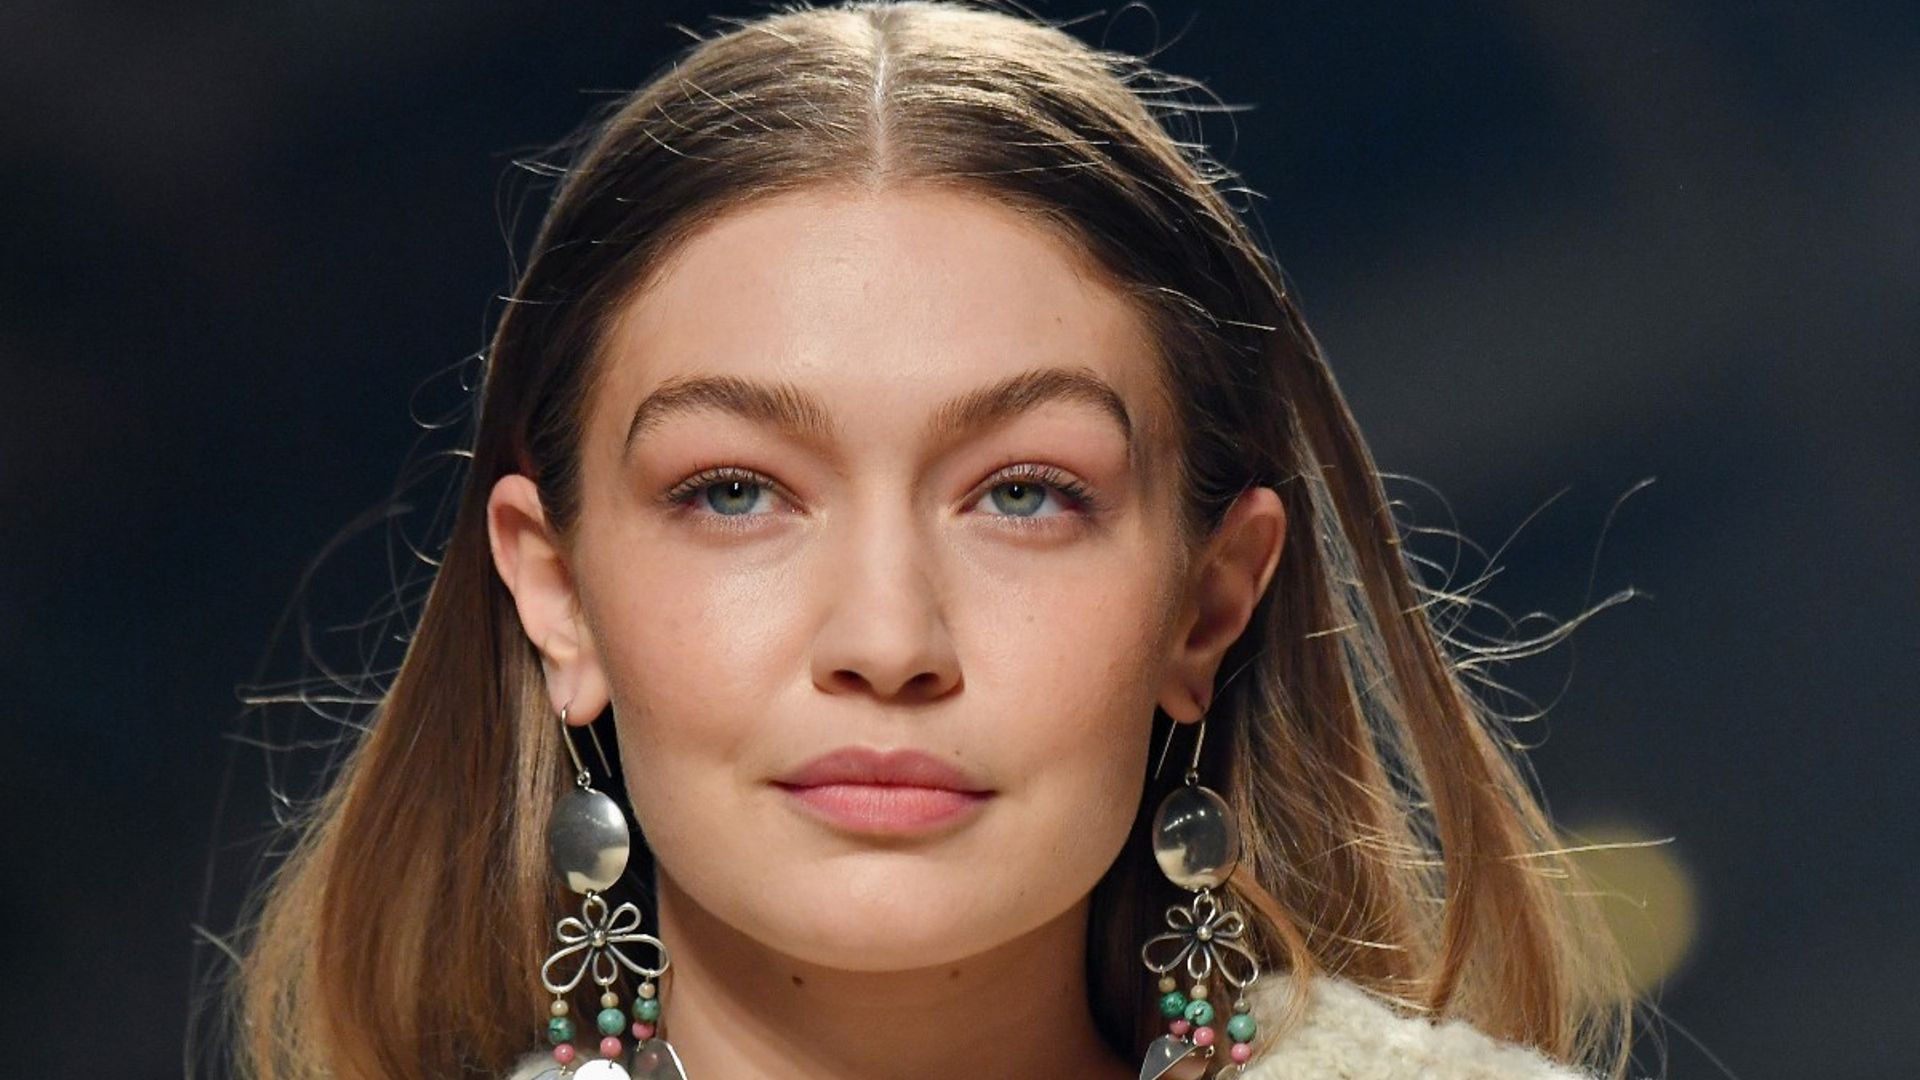 Gigi Hadid's daughter prepares for special occasion in cutest baby outfit yet